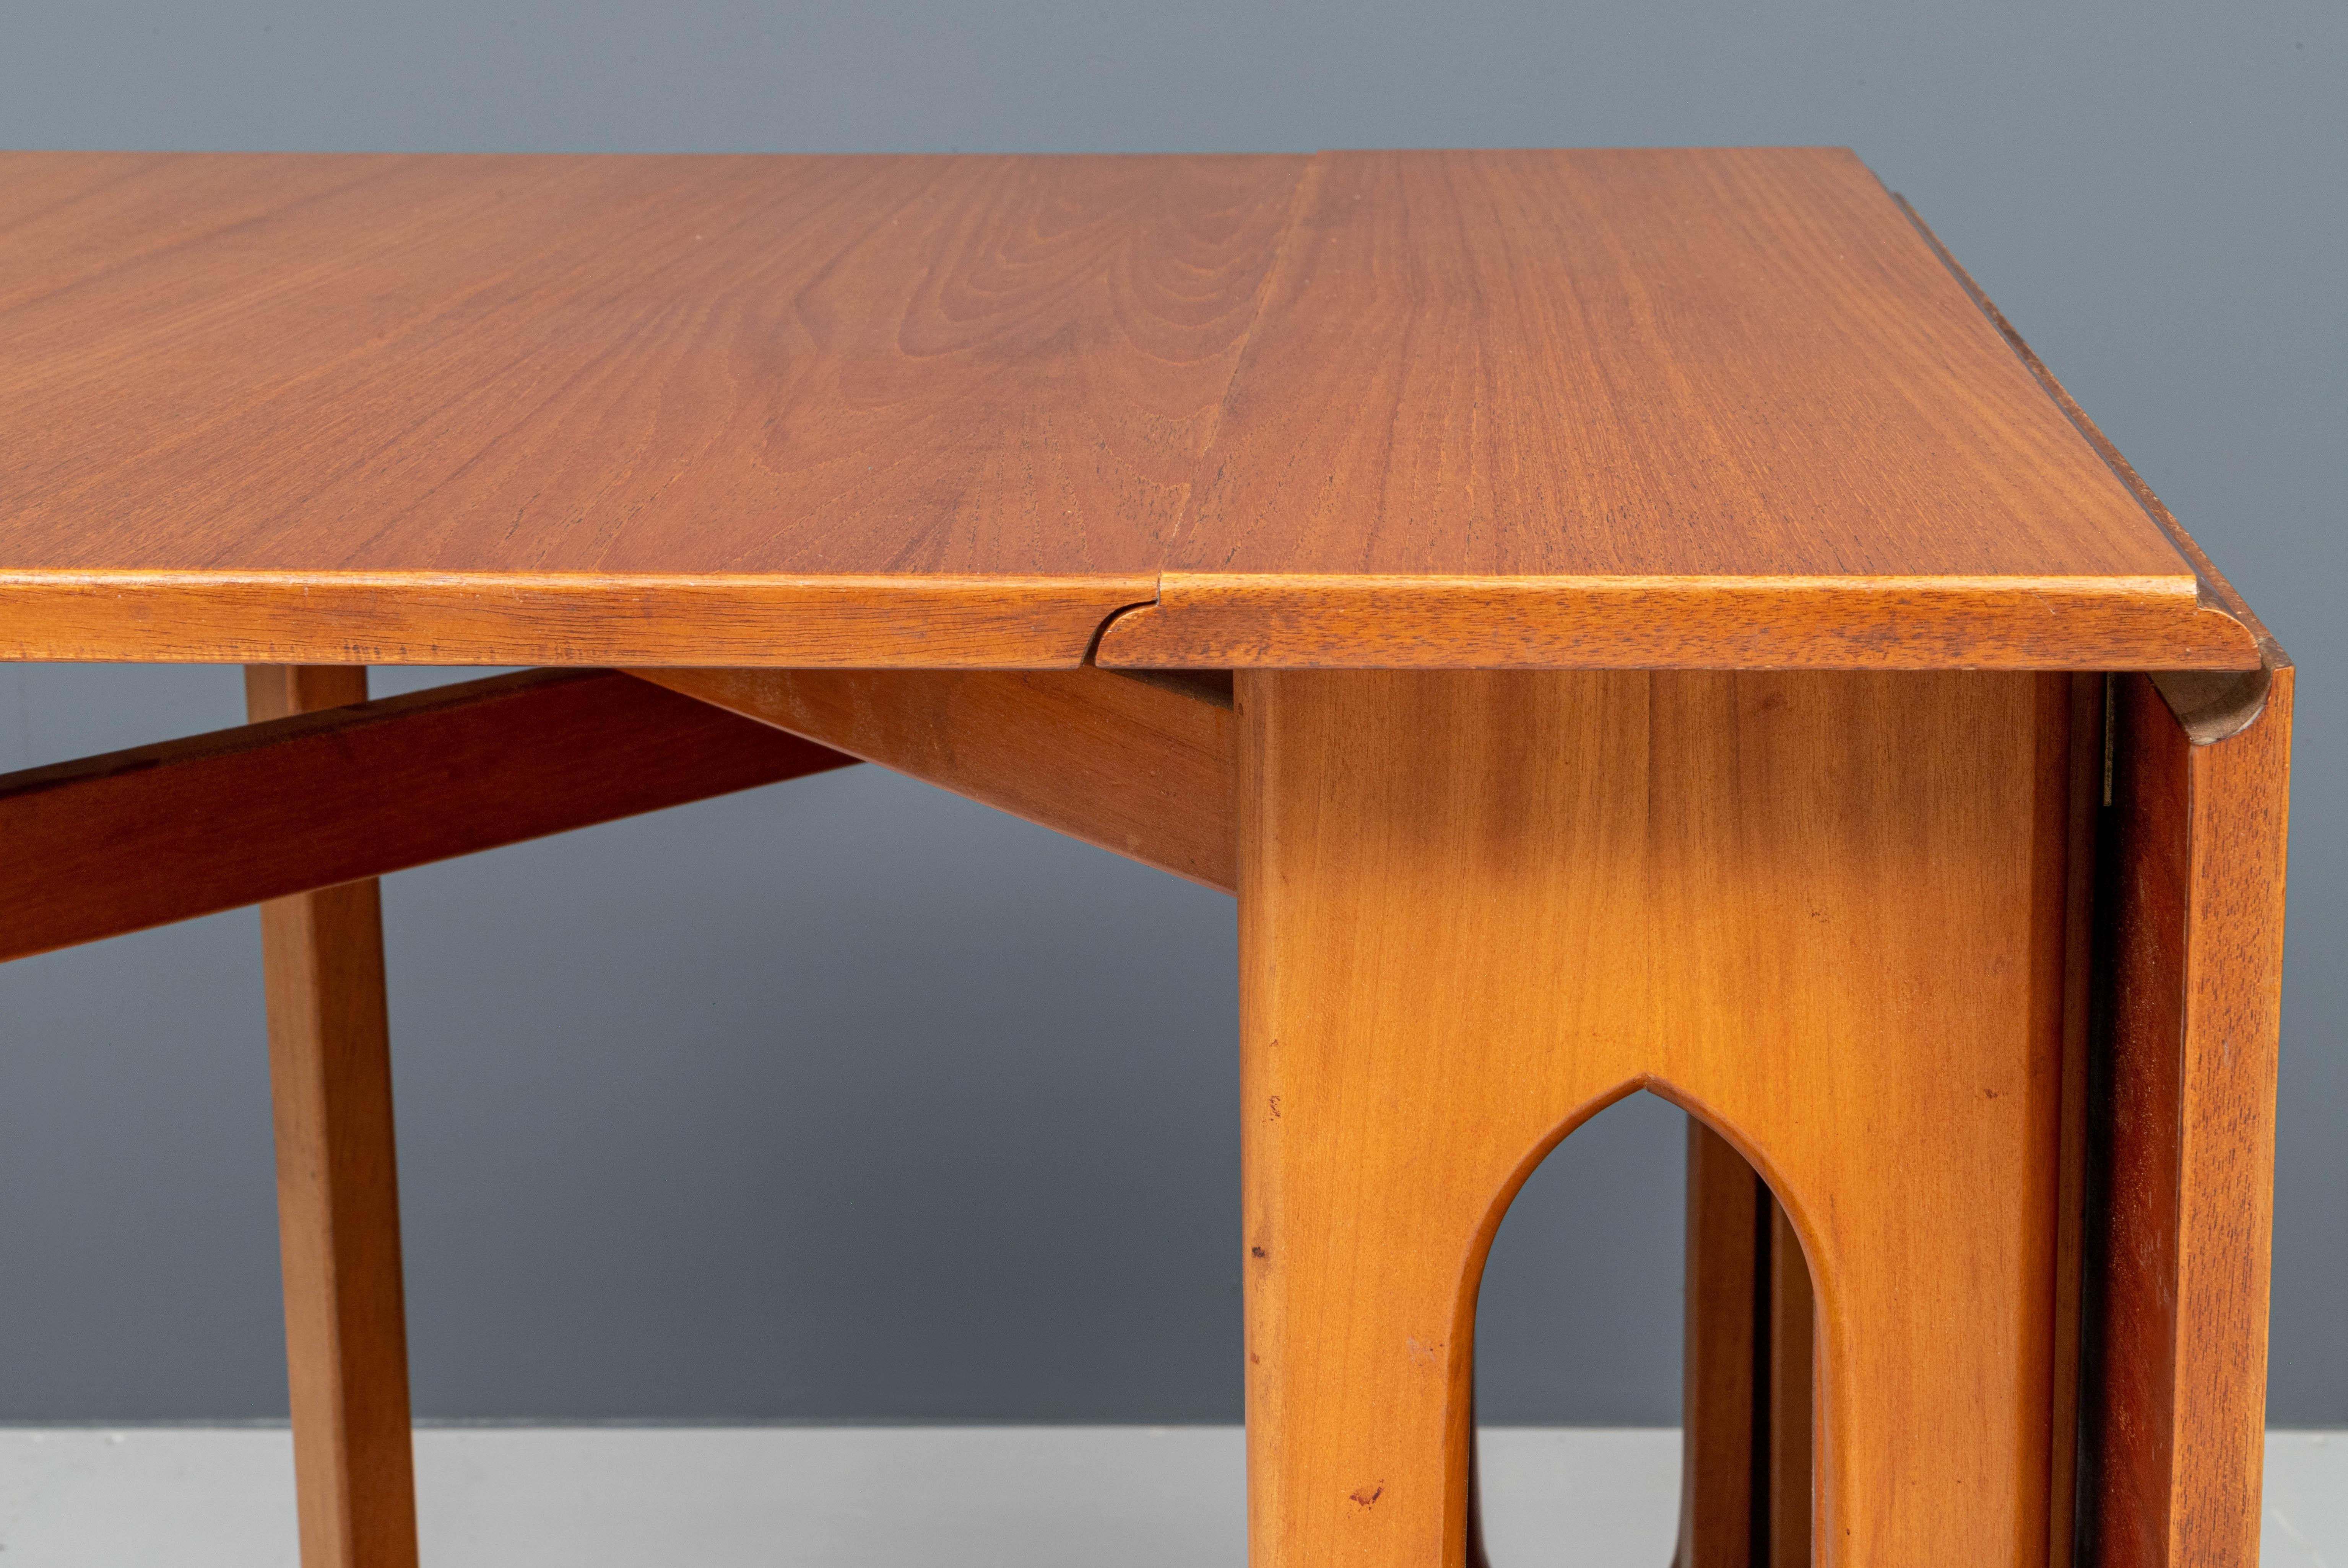 Sculptural Dining Table with Two Drop Leaves in Teak, Denmark, 1960's For Sale 1